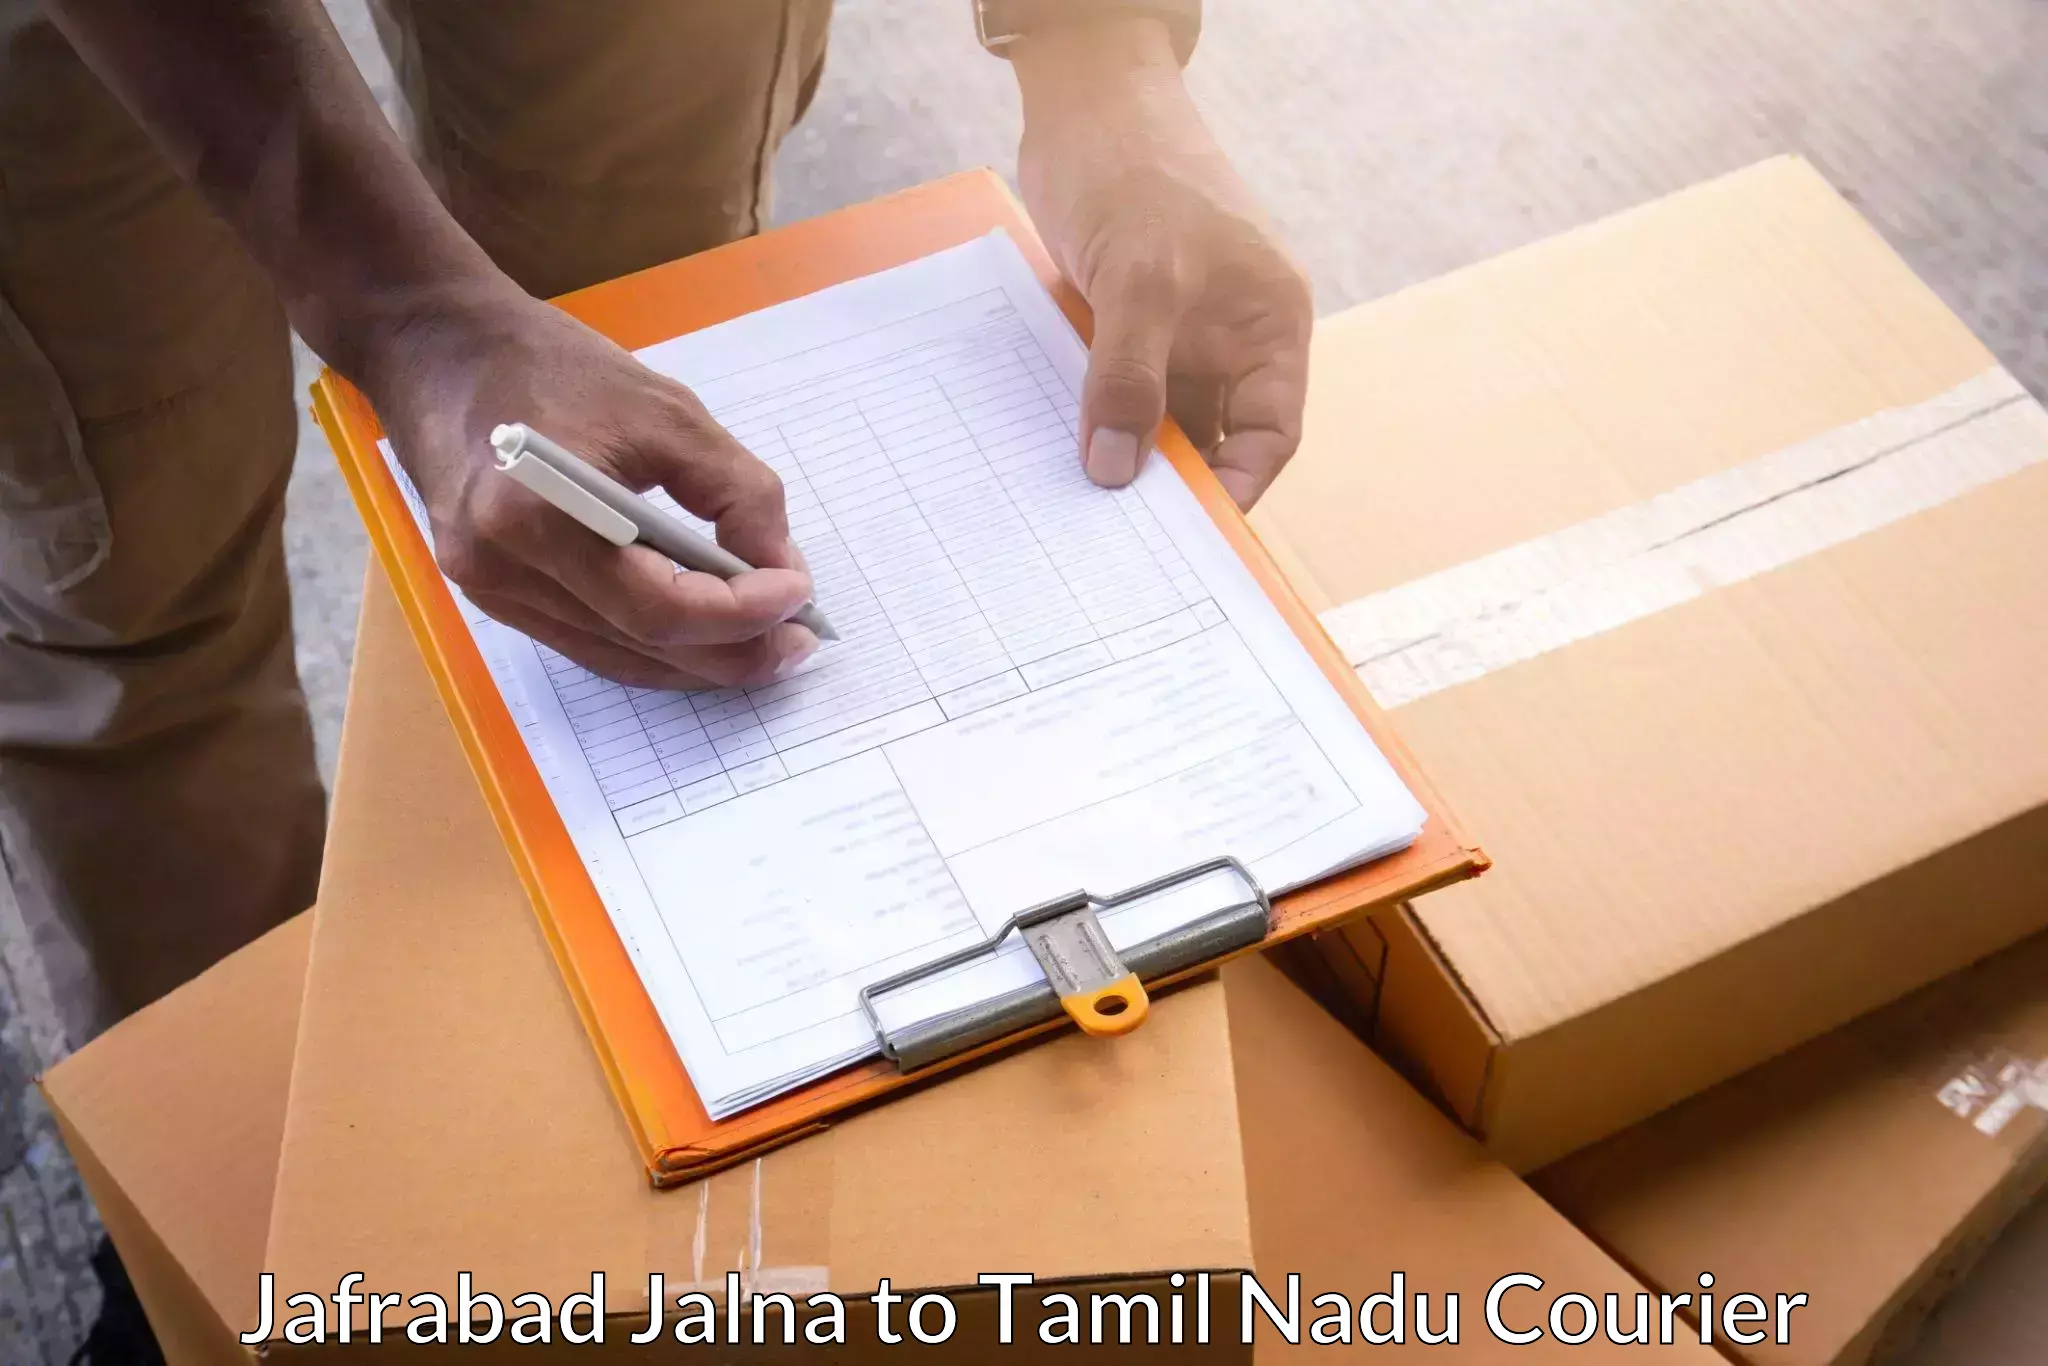 Corporate courier solutions Jafrabad Jalna to Tamil Nadu